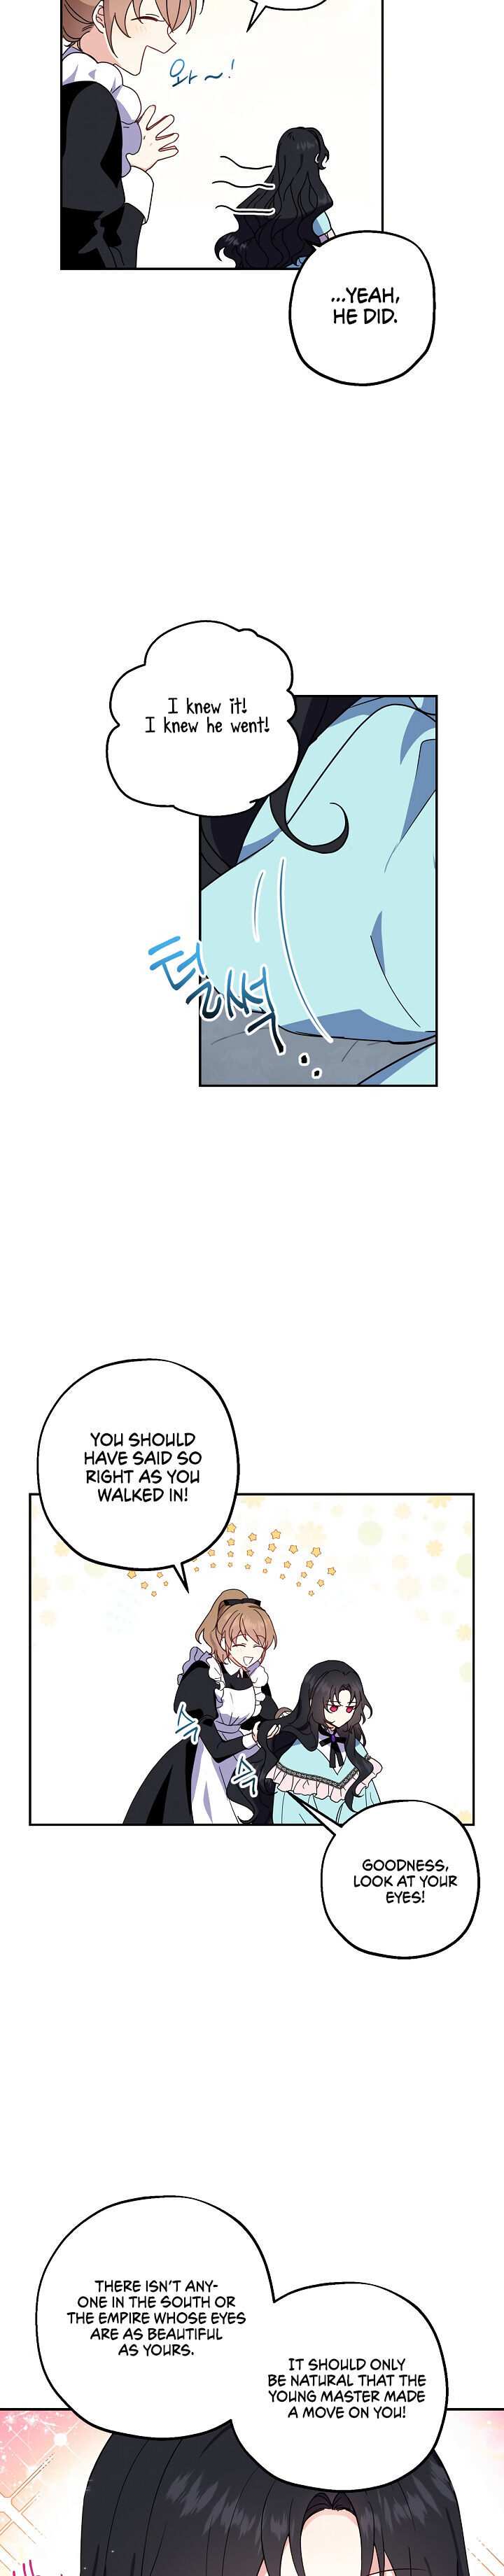 Here Comes the Silver Spoon!  - page 2